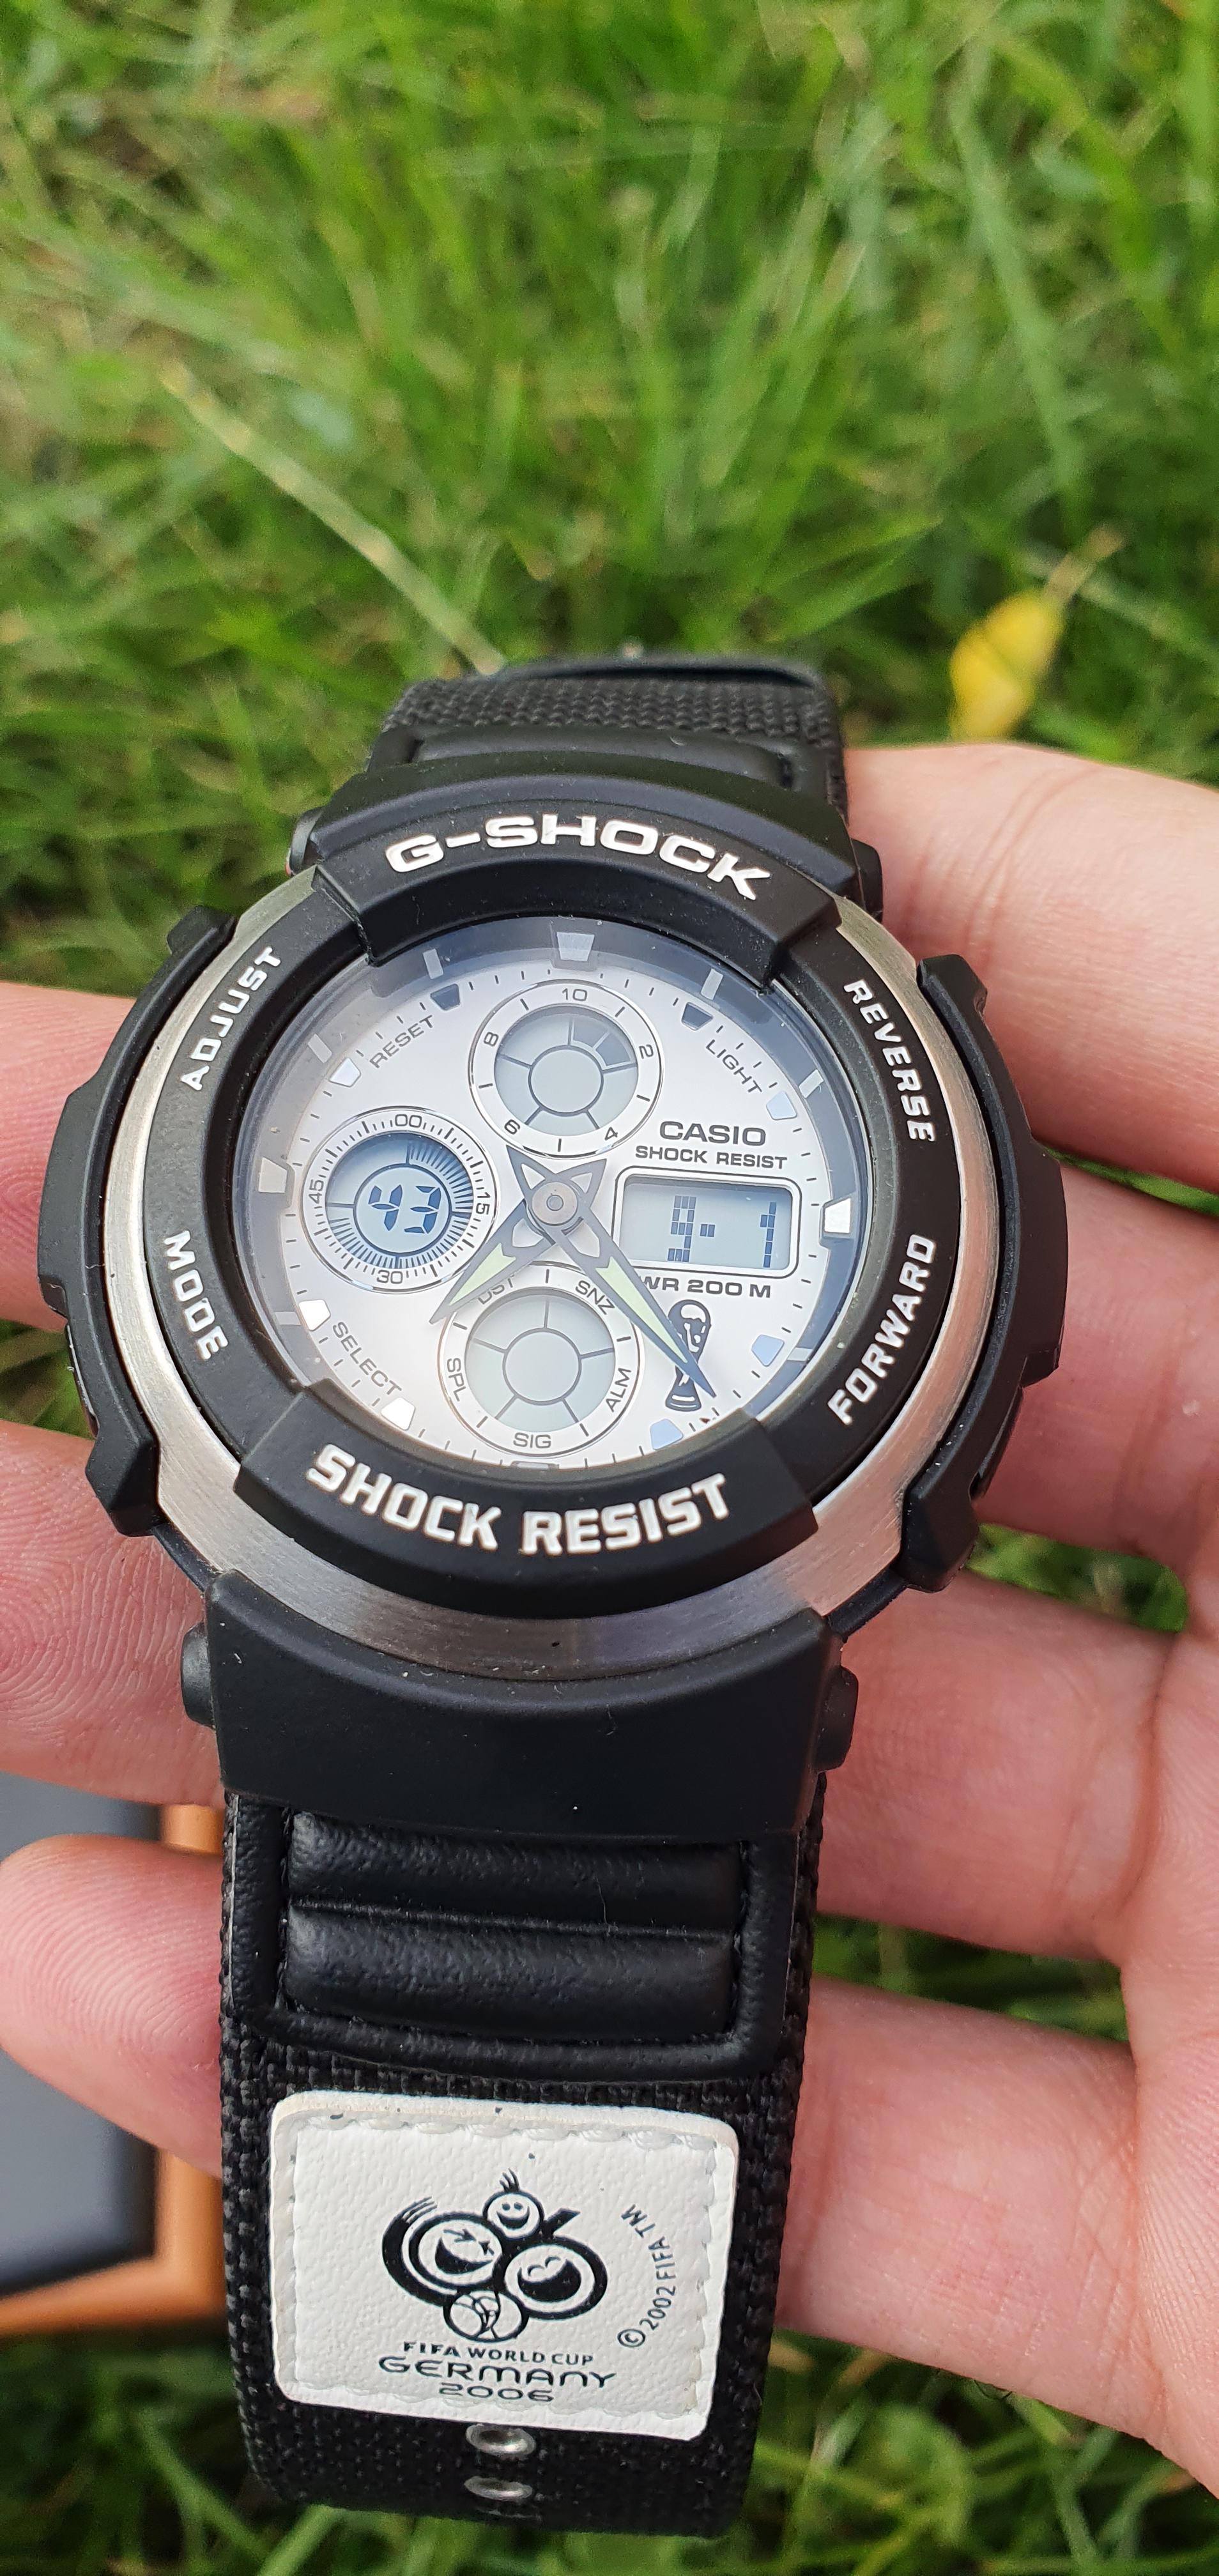 WTS] Limited Edition Casio G-Shock FIFA 2006 - Full Box - Like New